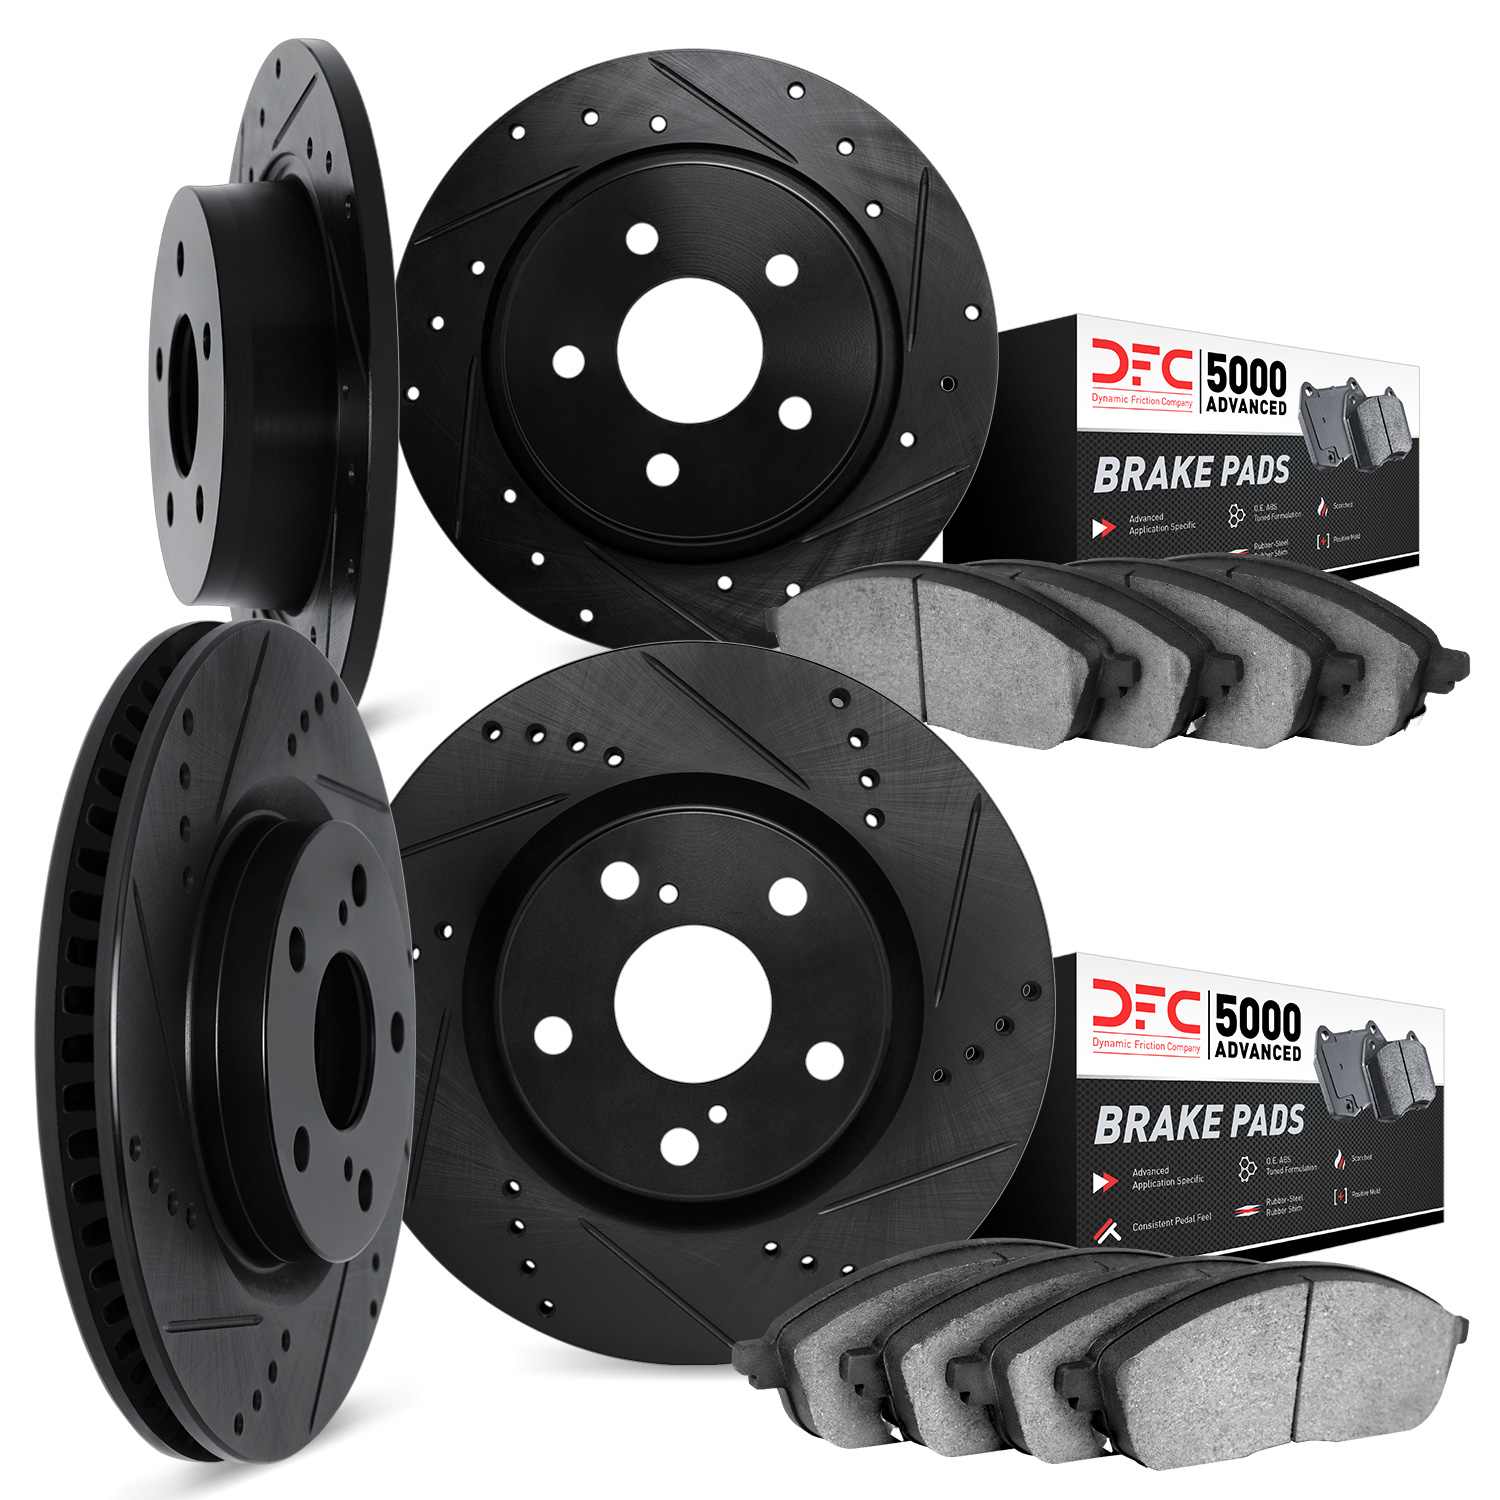 8504-76148 Drilled/Slotted Brake Rotors w/5000 Advanced Brake Pads Kit [Black], 2005-2010 Lexus/Toyota/Scion, Position: Front an